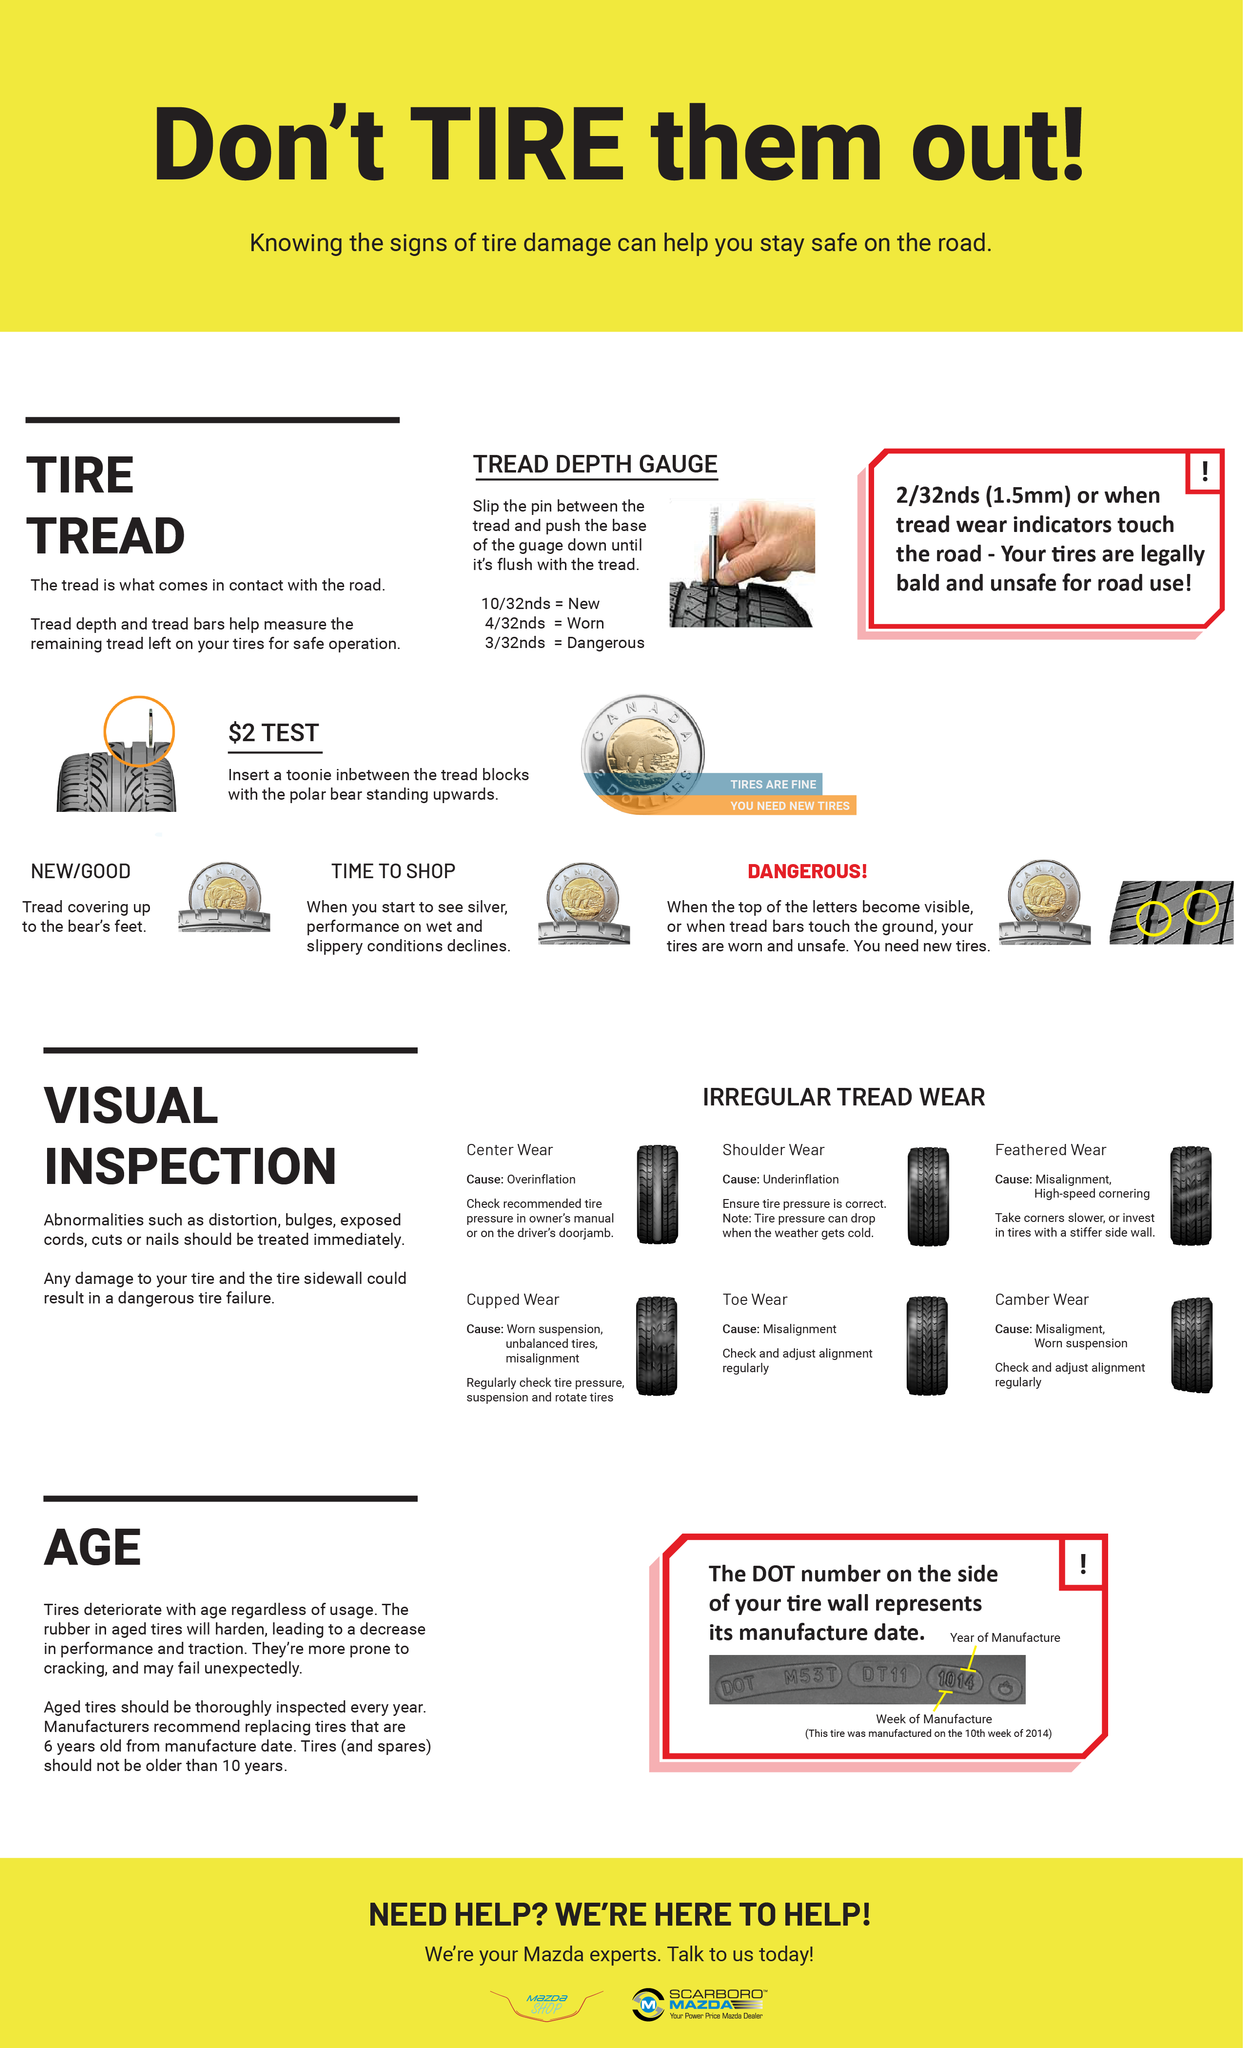 MazdaShop - How to tell if your tires need replacing